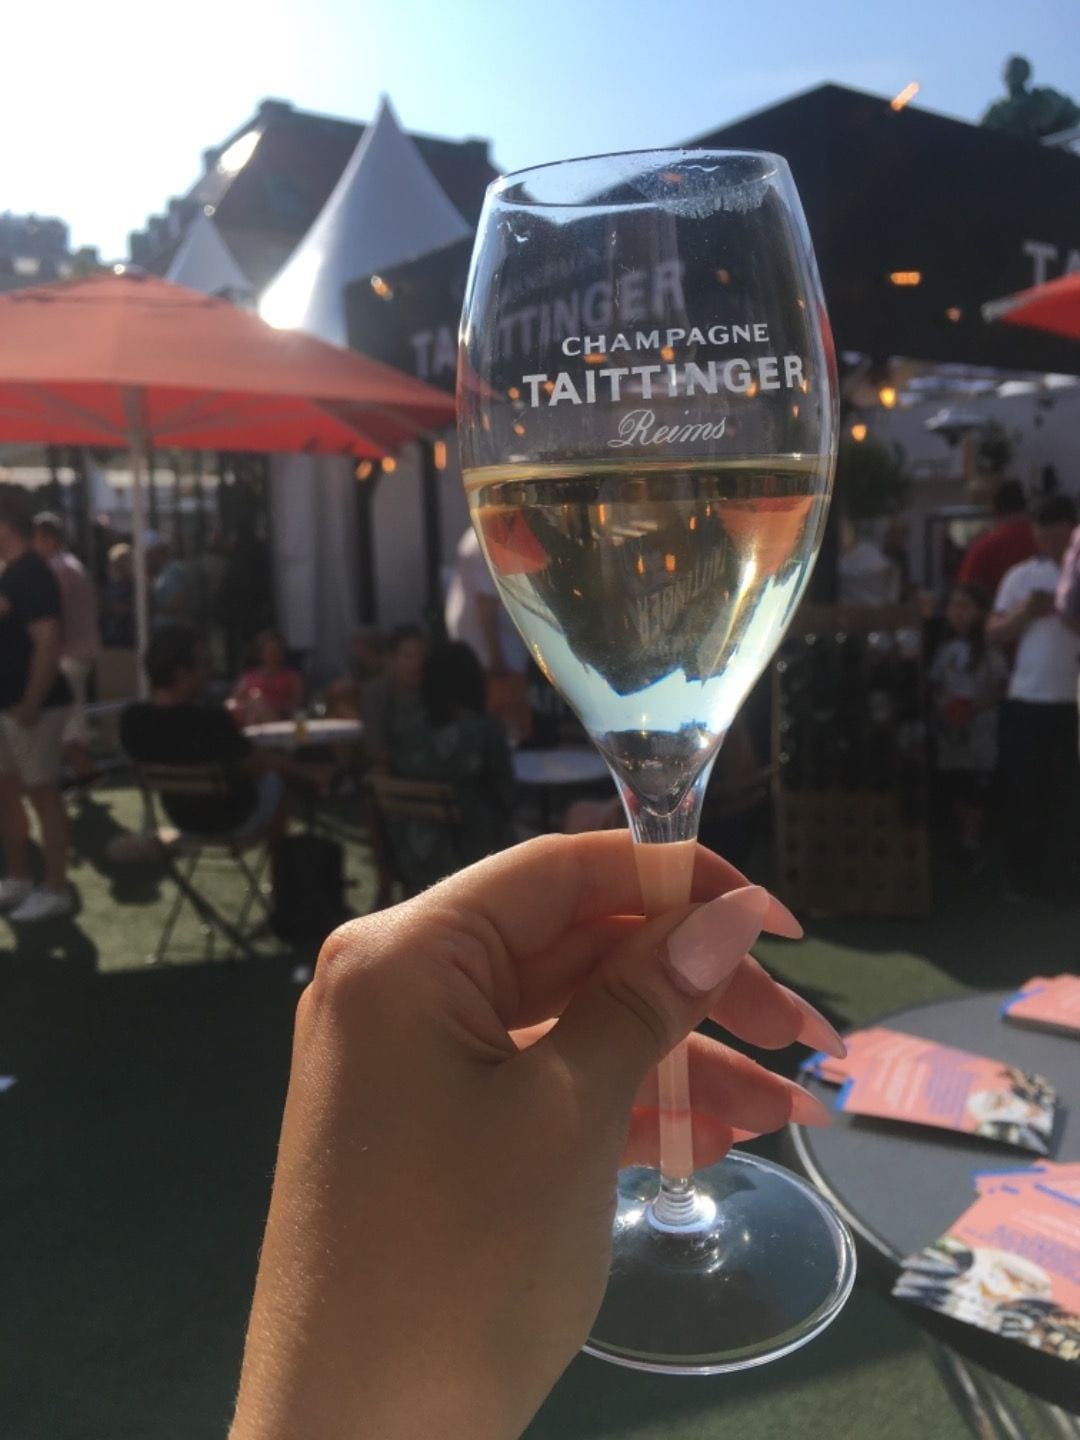 Tattinger  – Photo from Smaka på Stockholm by Mimmi S. (09/06/2019)